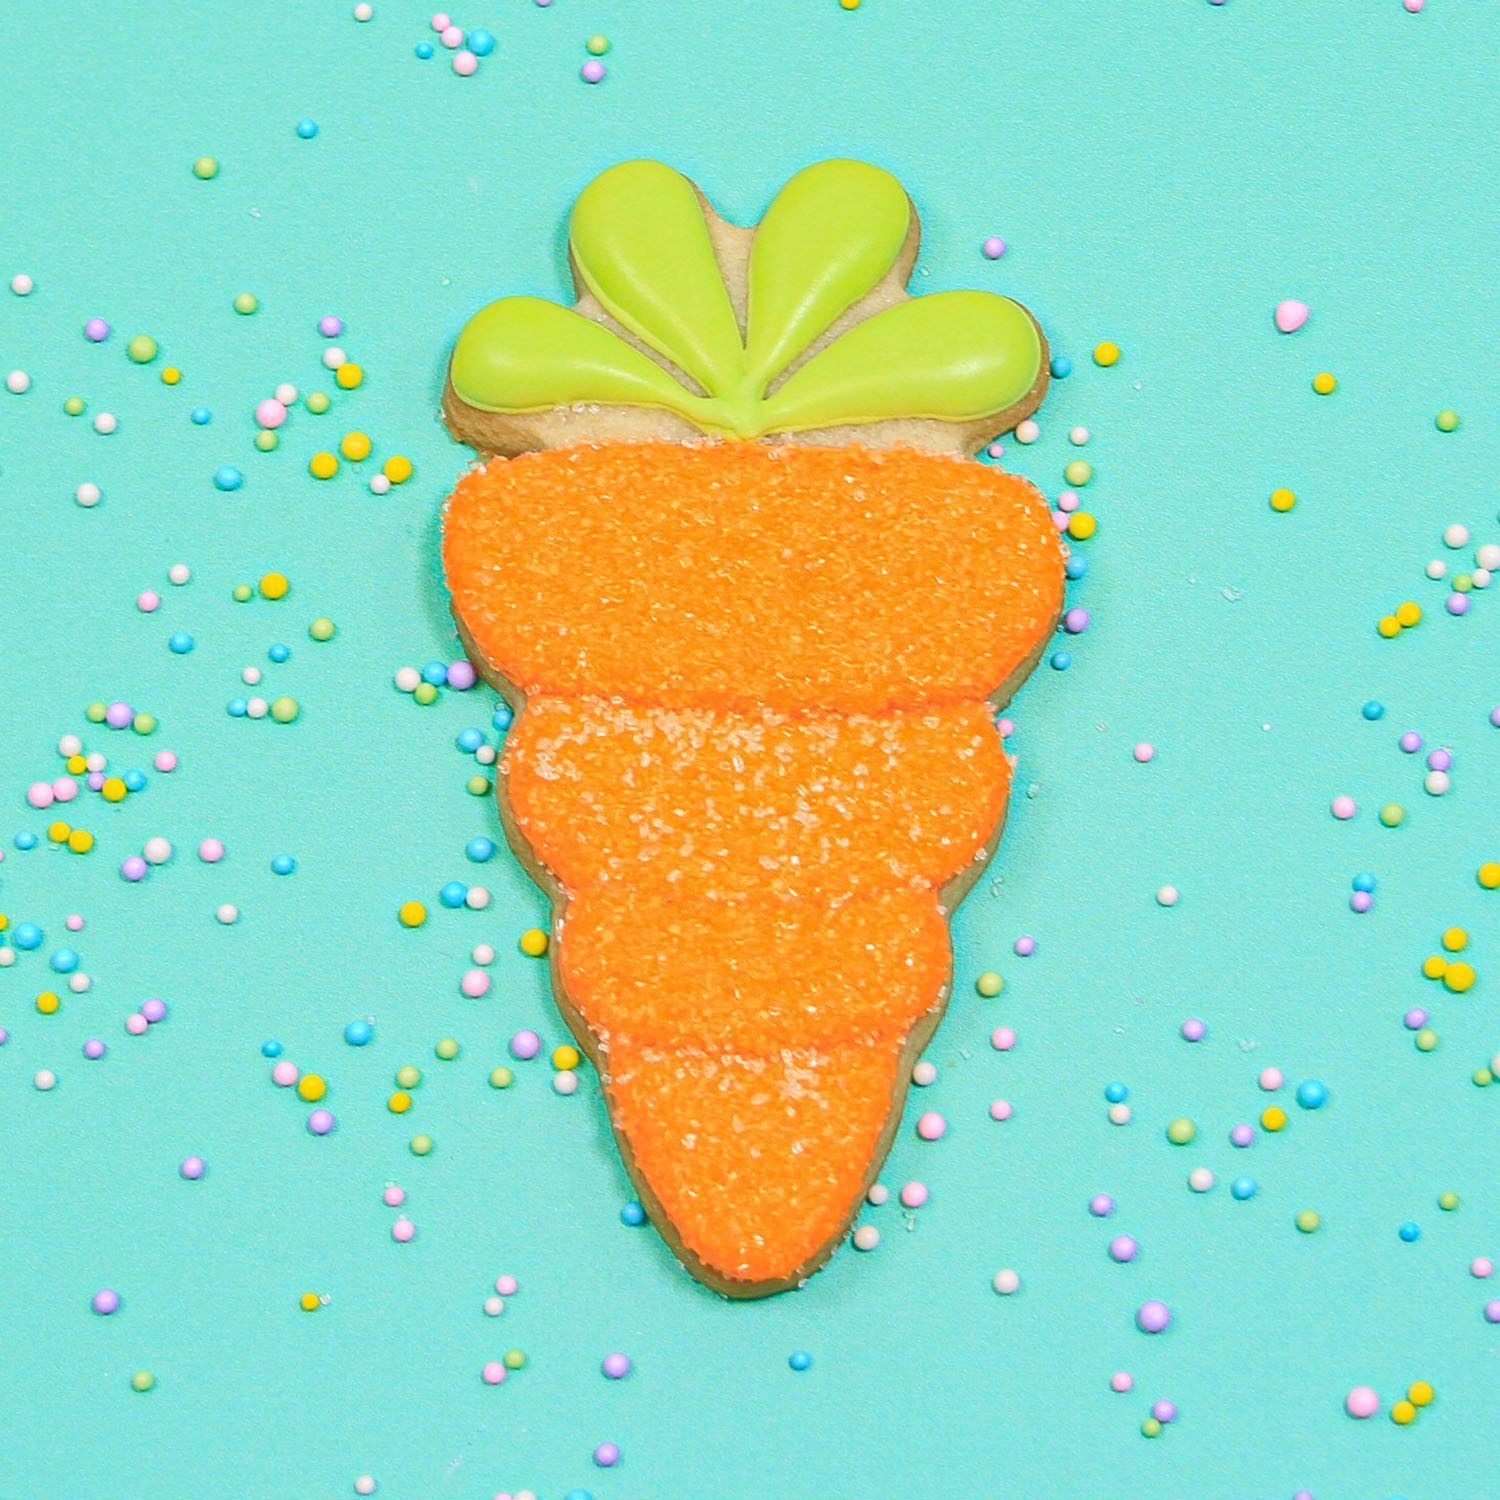 Royal Icing decorated carrot dipped in sanding sugar to sparkle